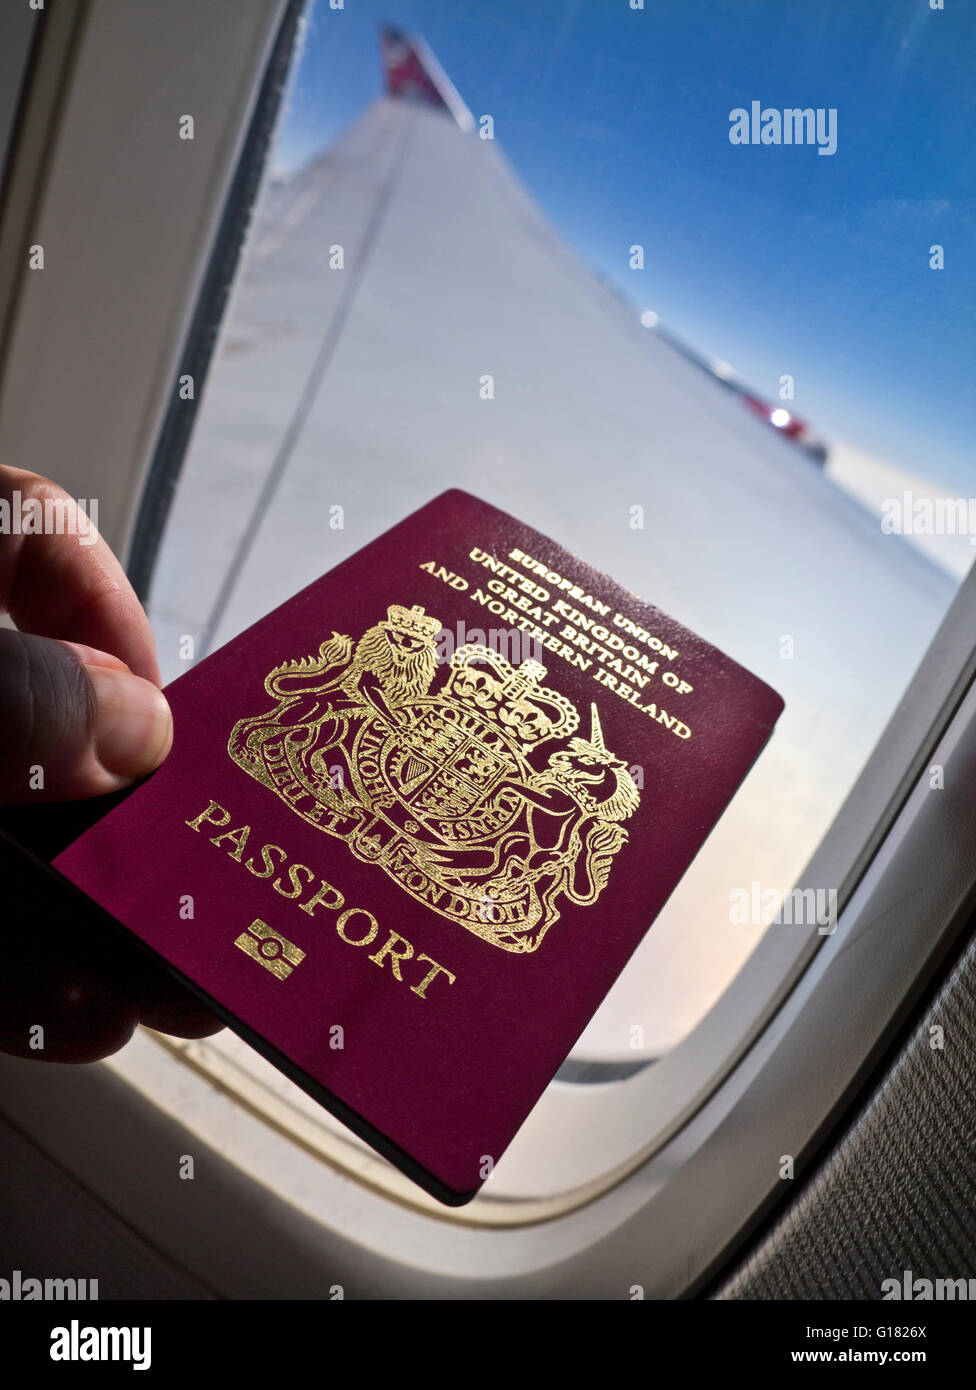 PASSPORT FLYING HOLIDAY FREEDOM Concept travel image of biometric British passport aircraft cabin with window wing and sky behind in-flight Stock Photo